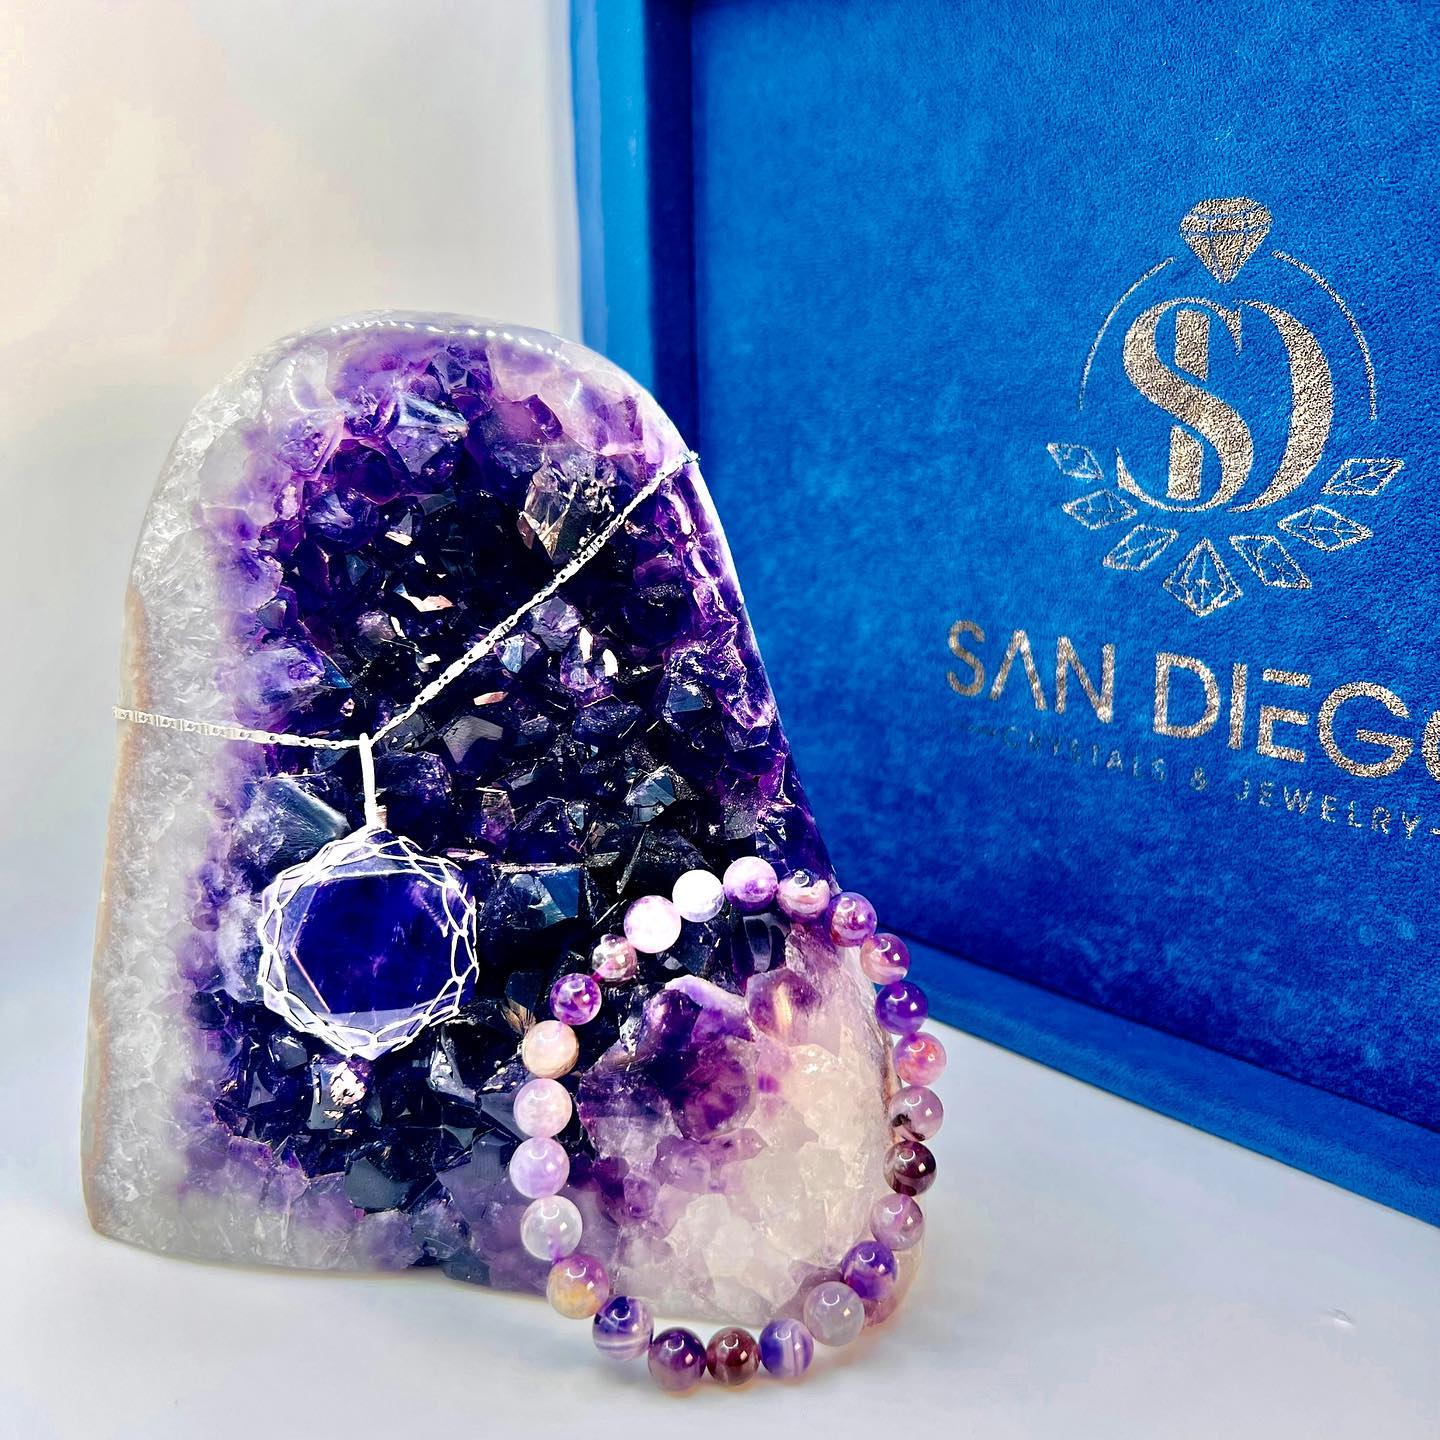 San Diego Crystals and Jewlery